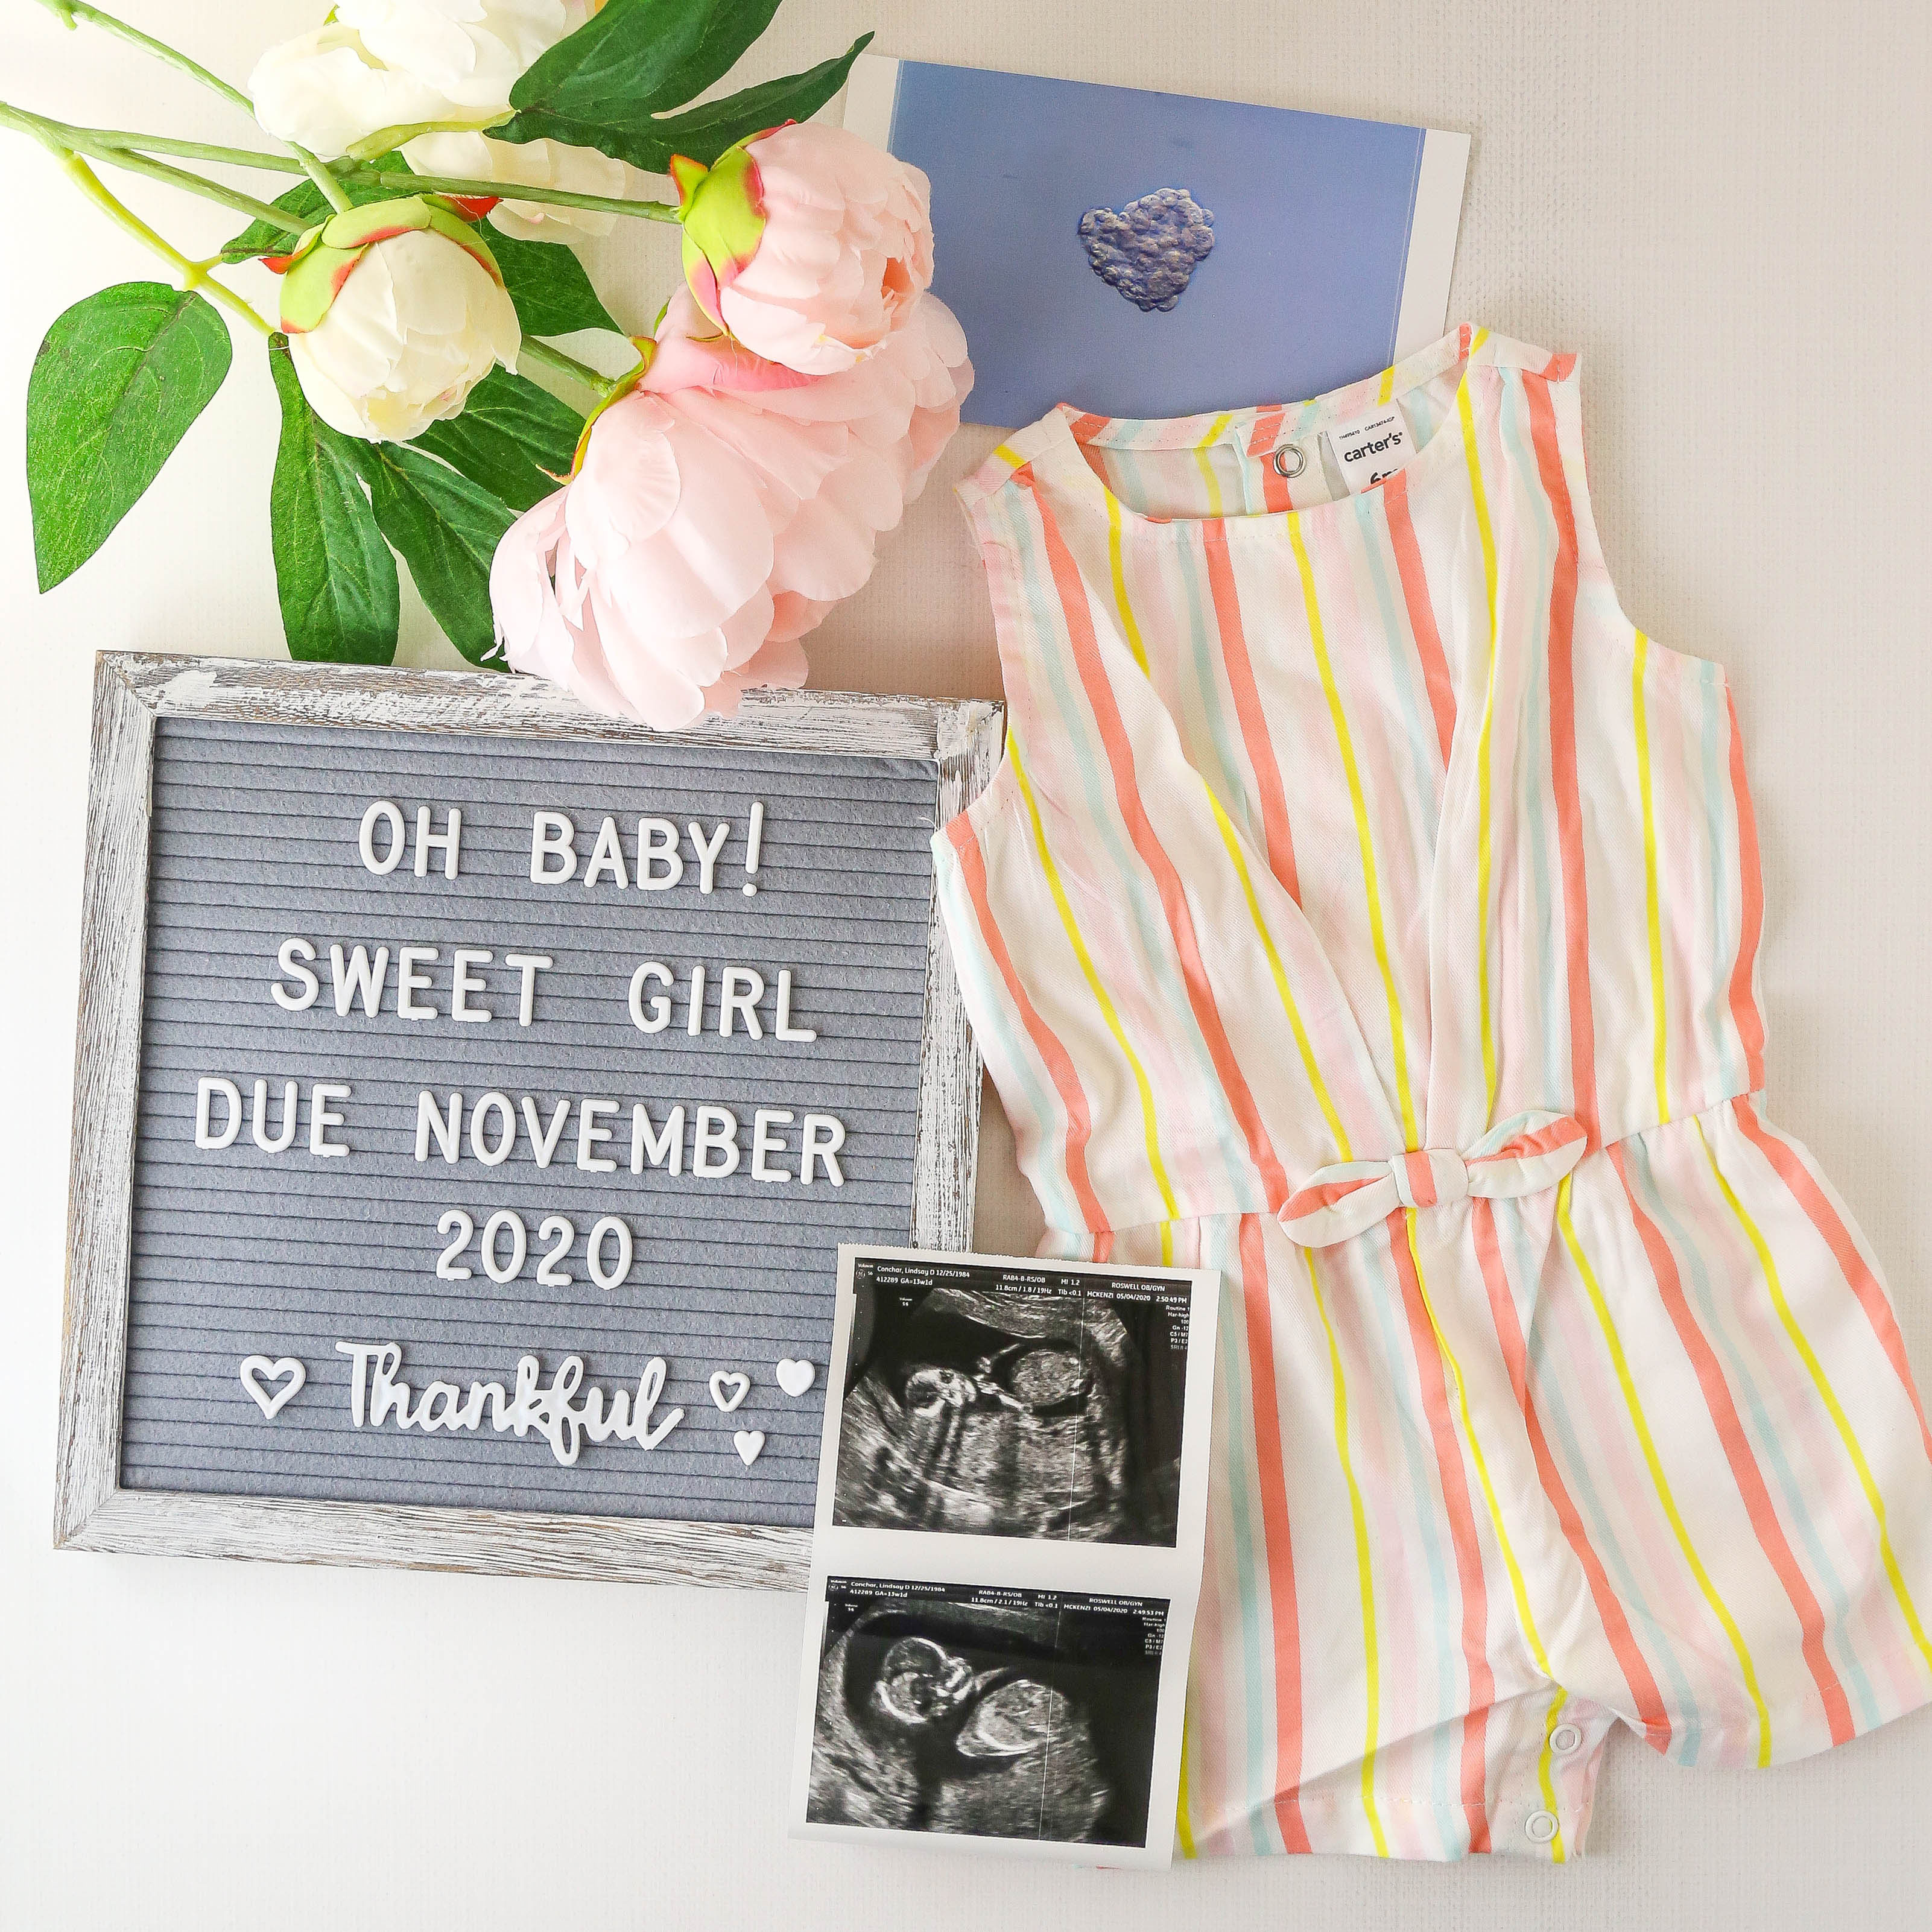 baby announcement photo with some flowers, sonogram photo, baby outfit and letterboard that says "oh baby! sweet girl due november 2020"